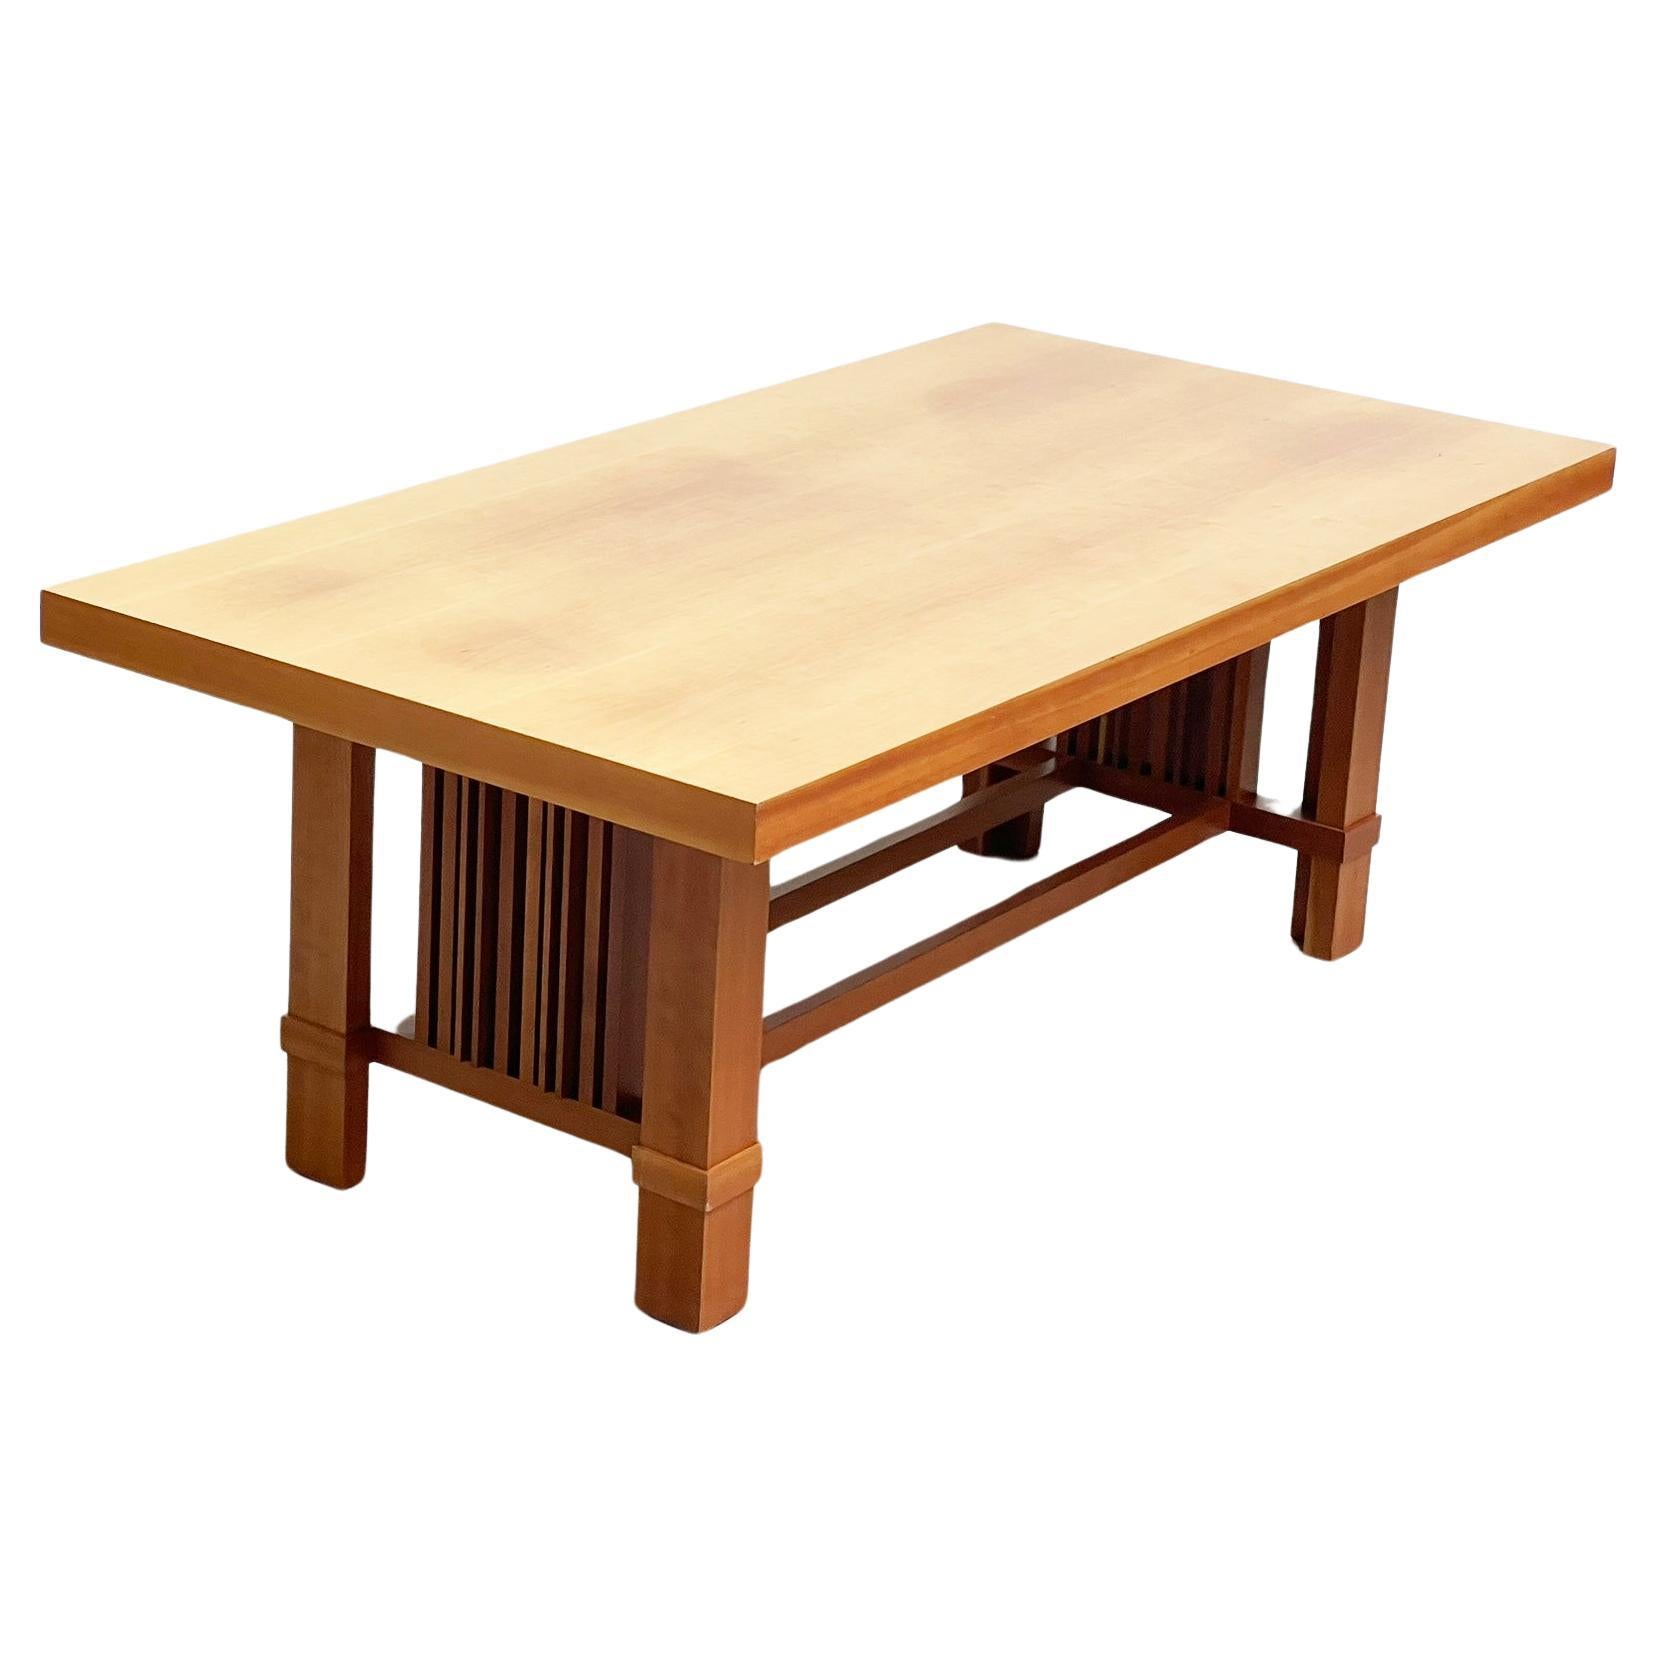 Frank Lloyd Wright “608 Taliesin” Dining Table signed by Cassina, 1986 For Sale